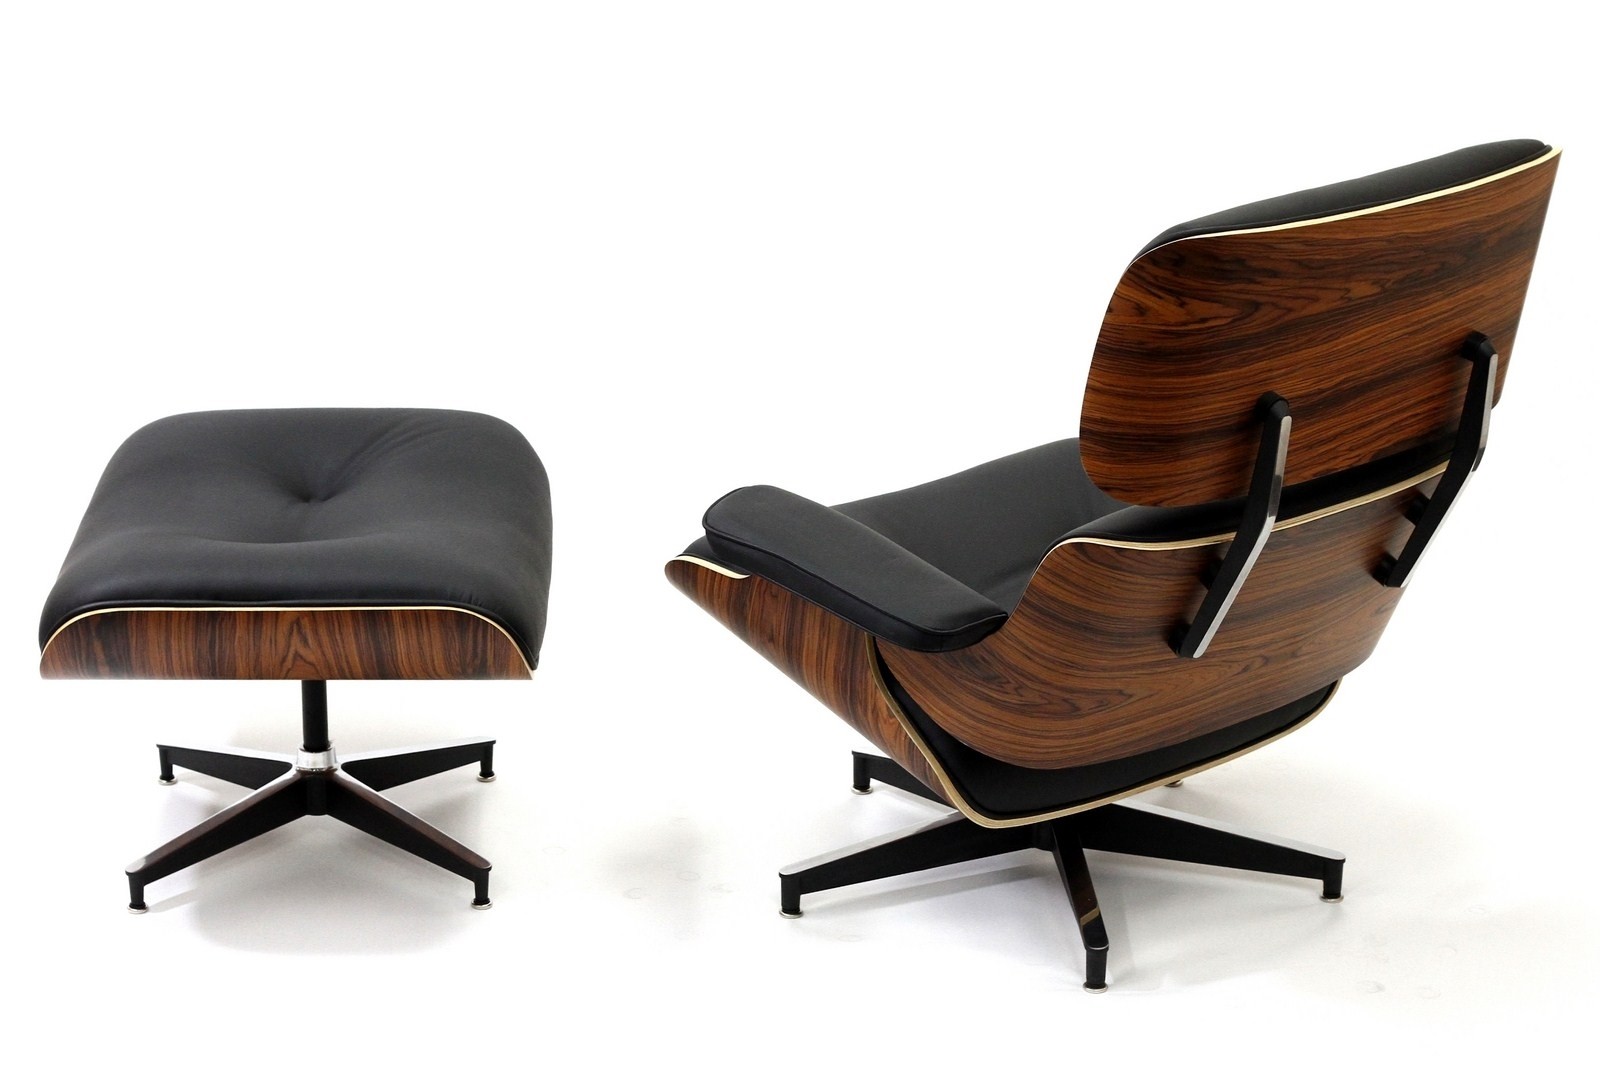 Eames Style Lounge Chair And Ottoman, Wood And Leather Chair